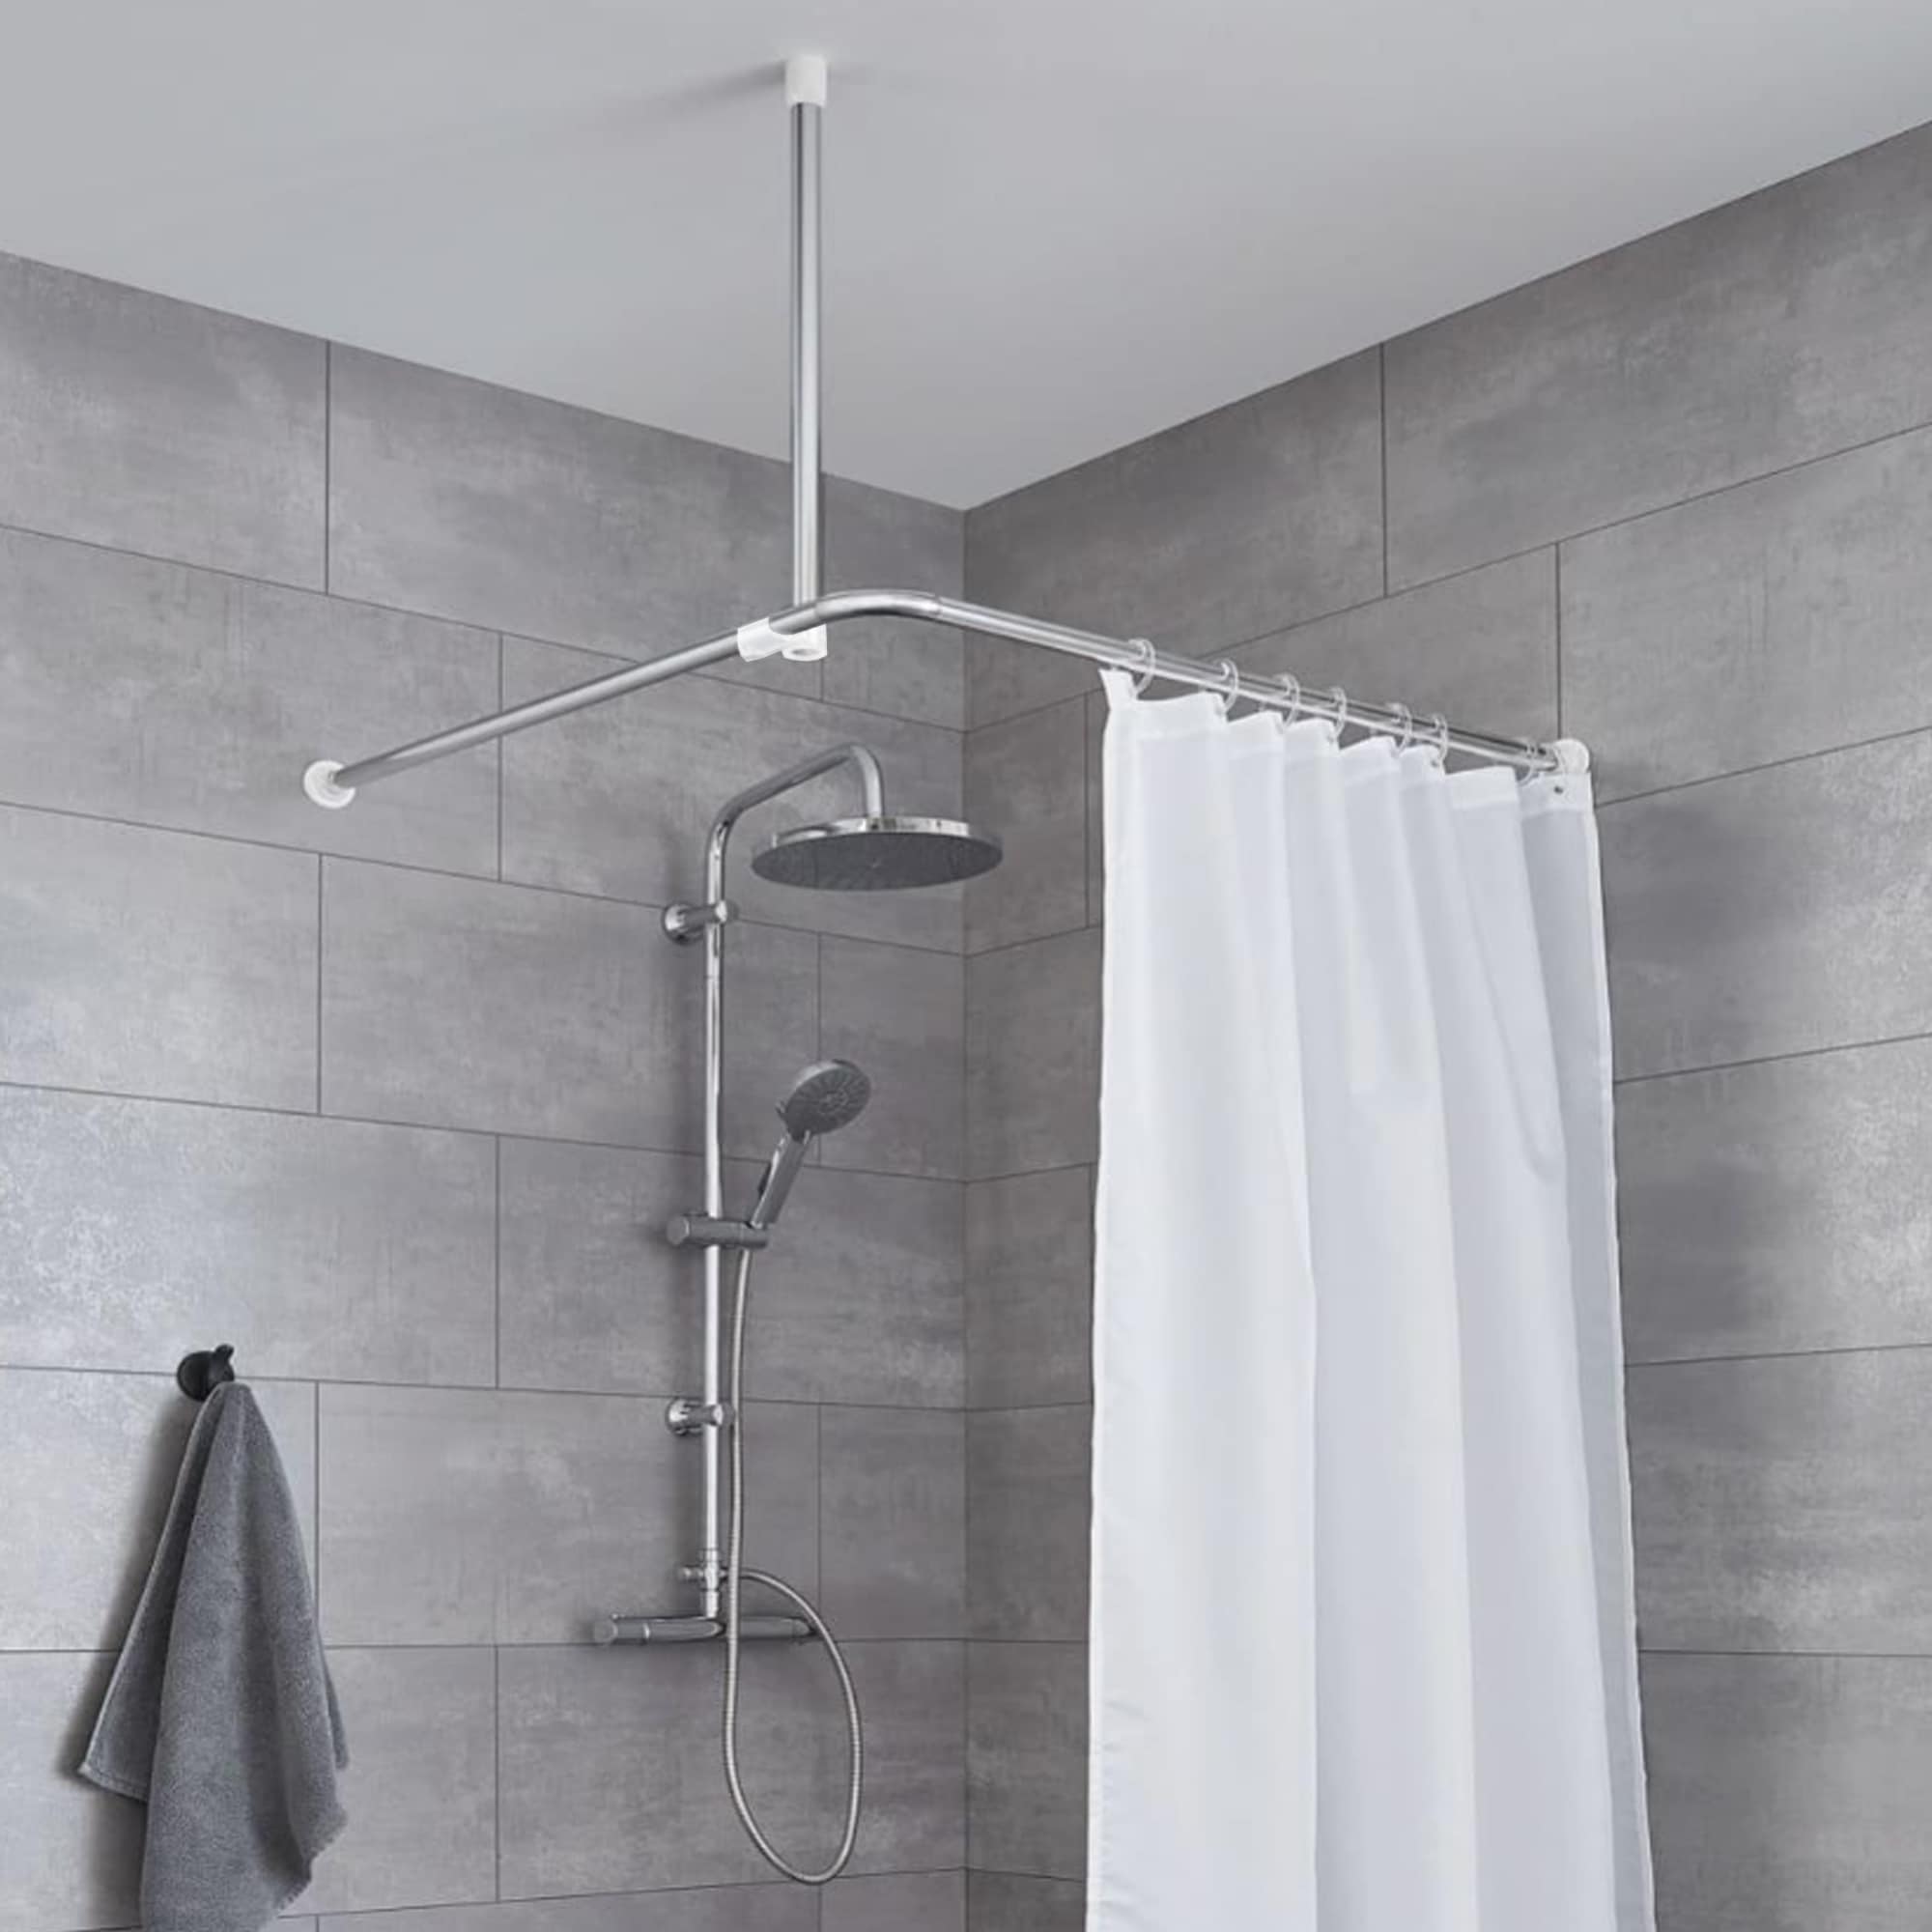 Chrome ceiling support rod in a grey bathroom, with shower curtain and modern shower fixture